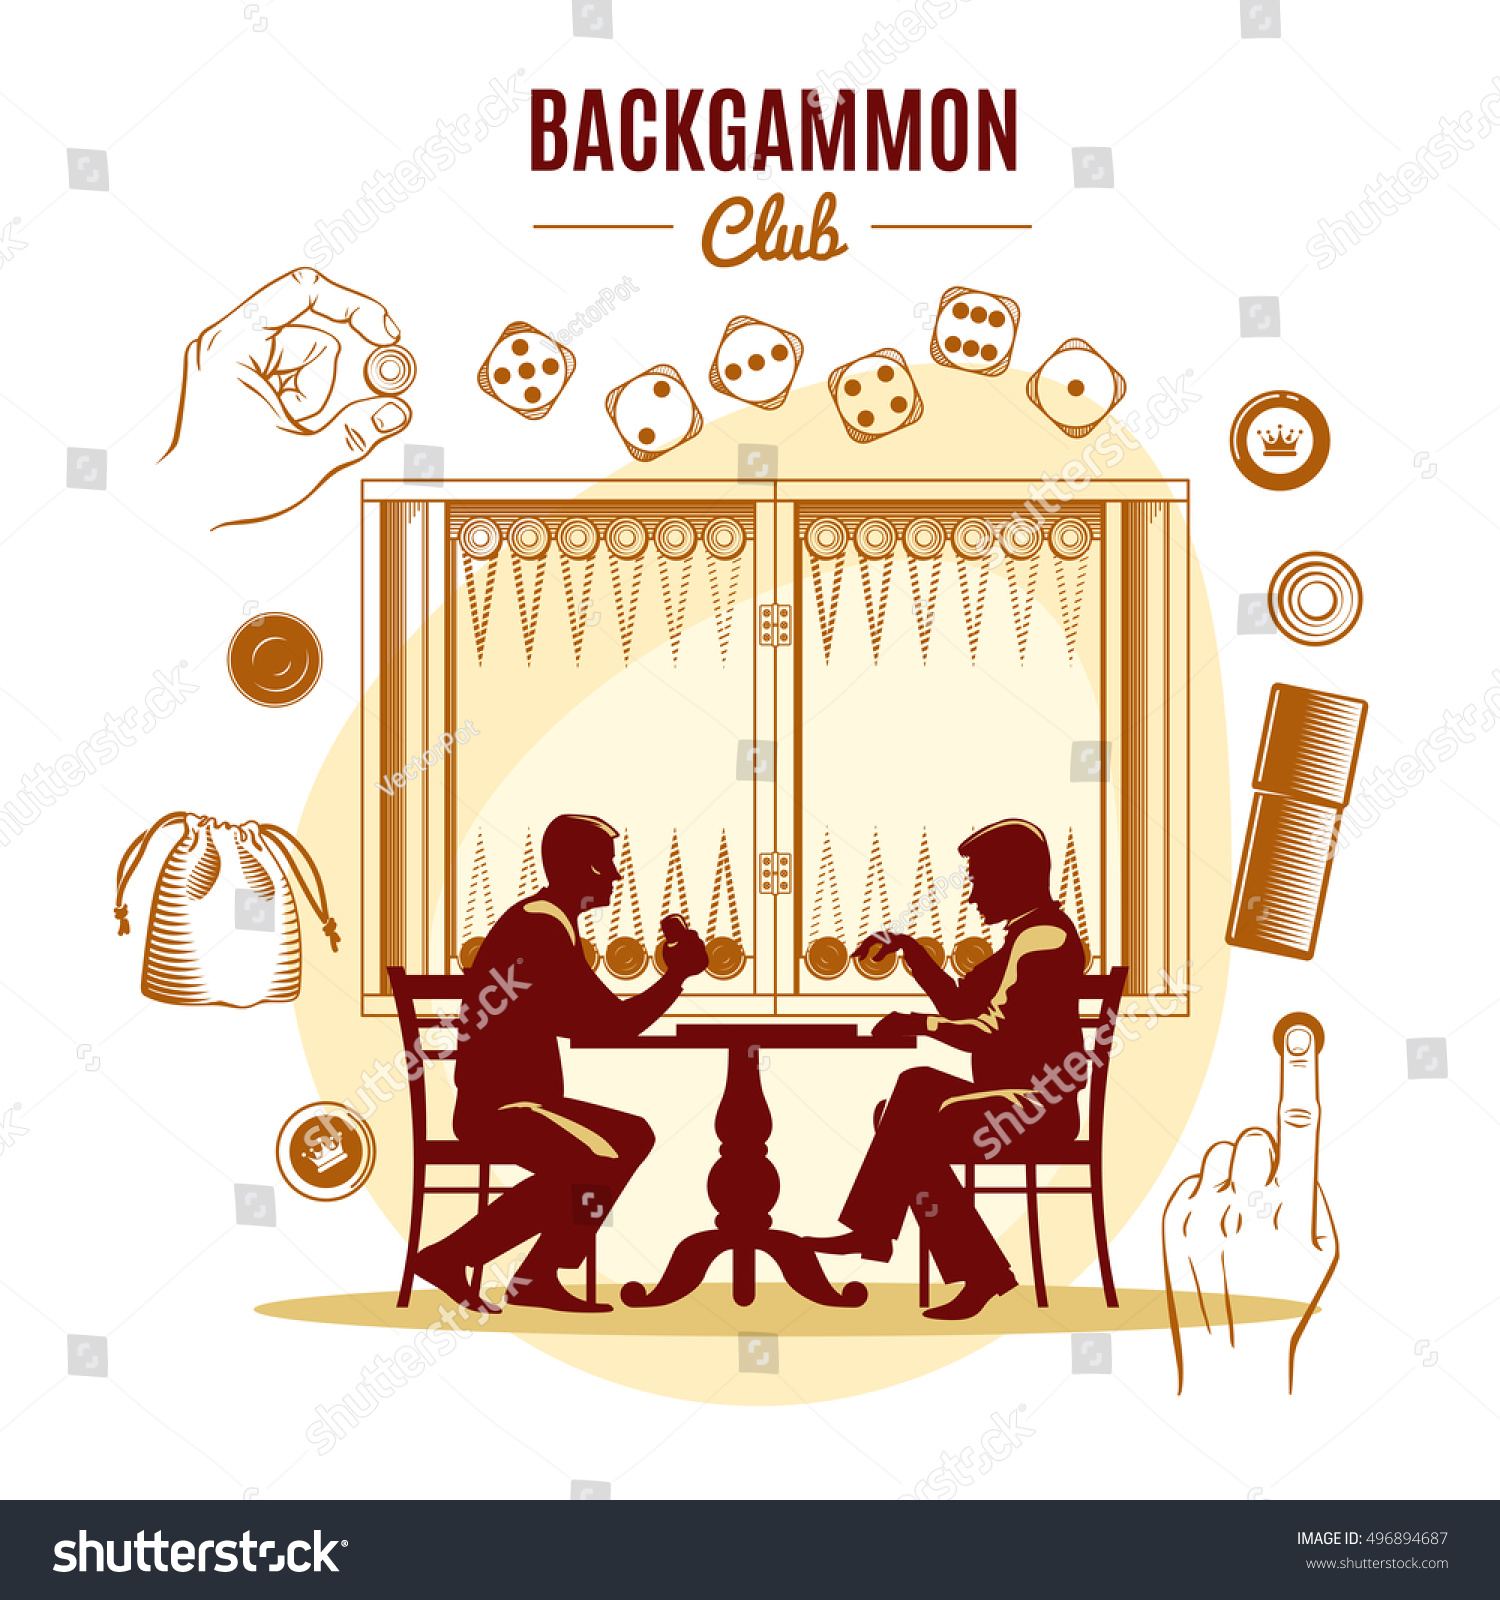 SVG of Backgammon club vintage style design with dice chips silhouettes of men on game board background vector illustration svg